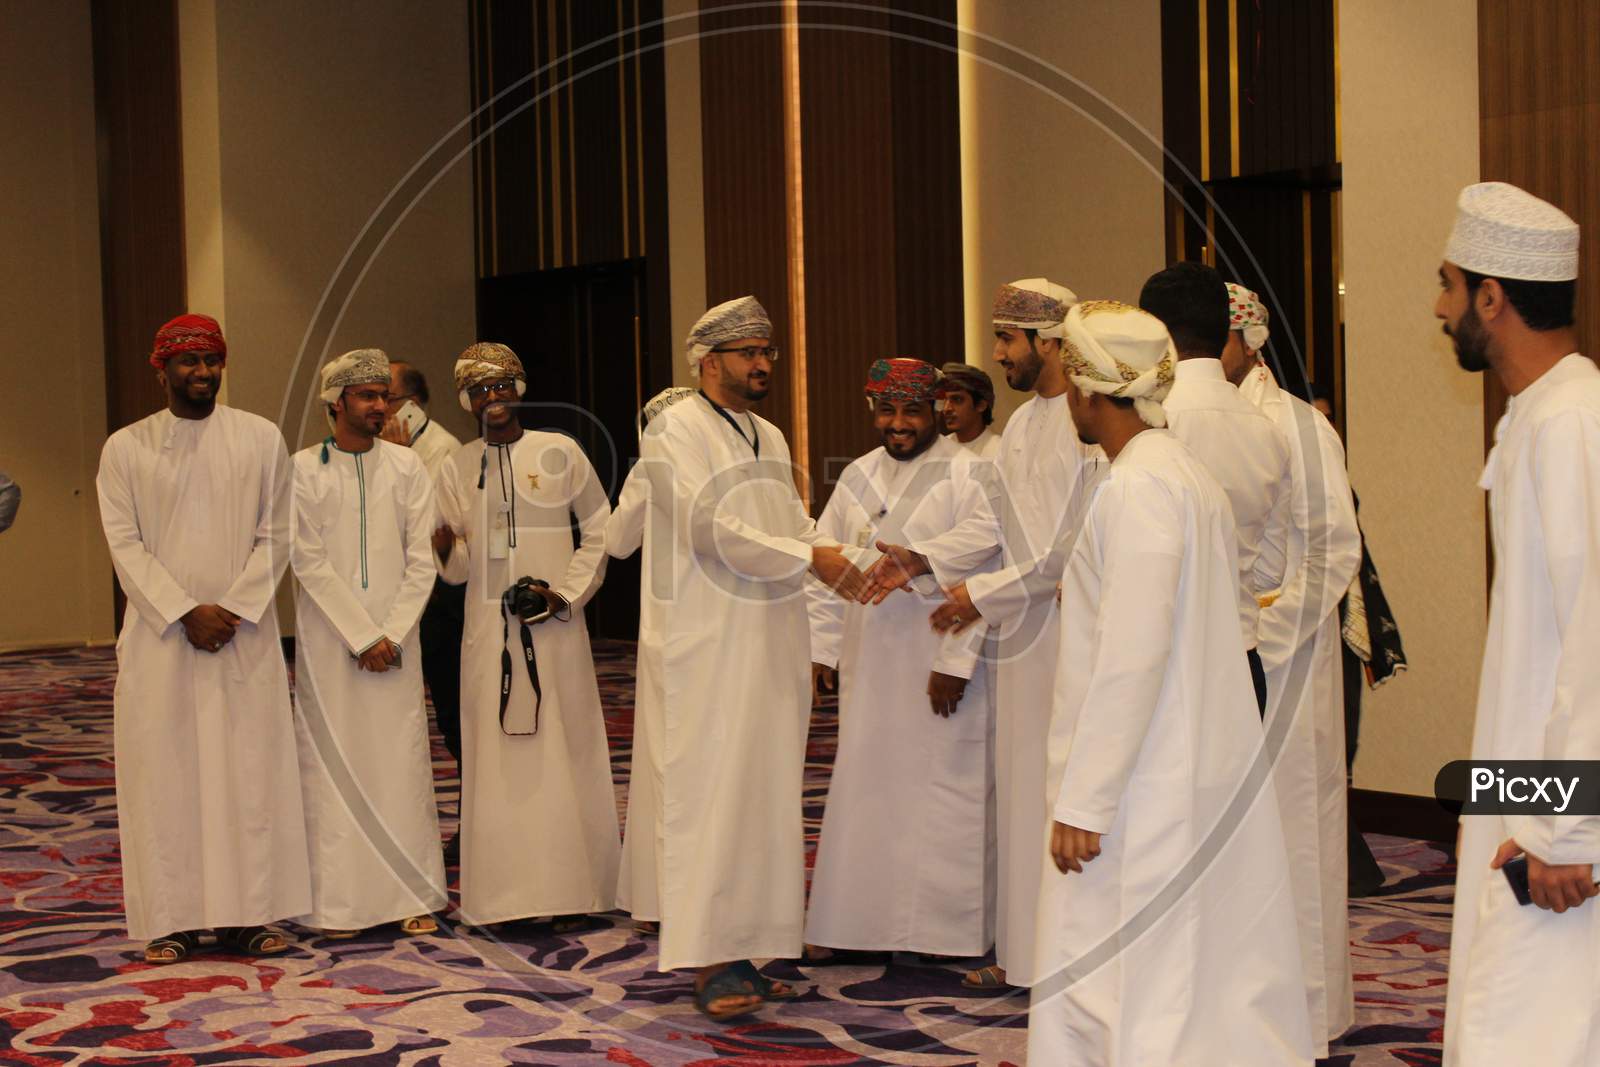 Omanis Are Celebrating National Day And Wishing Each Other In An Fraser Suites Muscat Banquet Hall